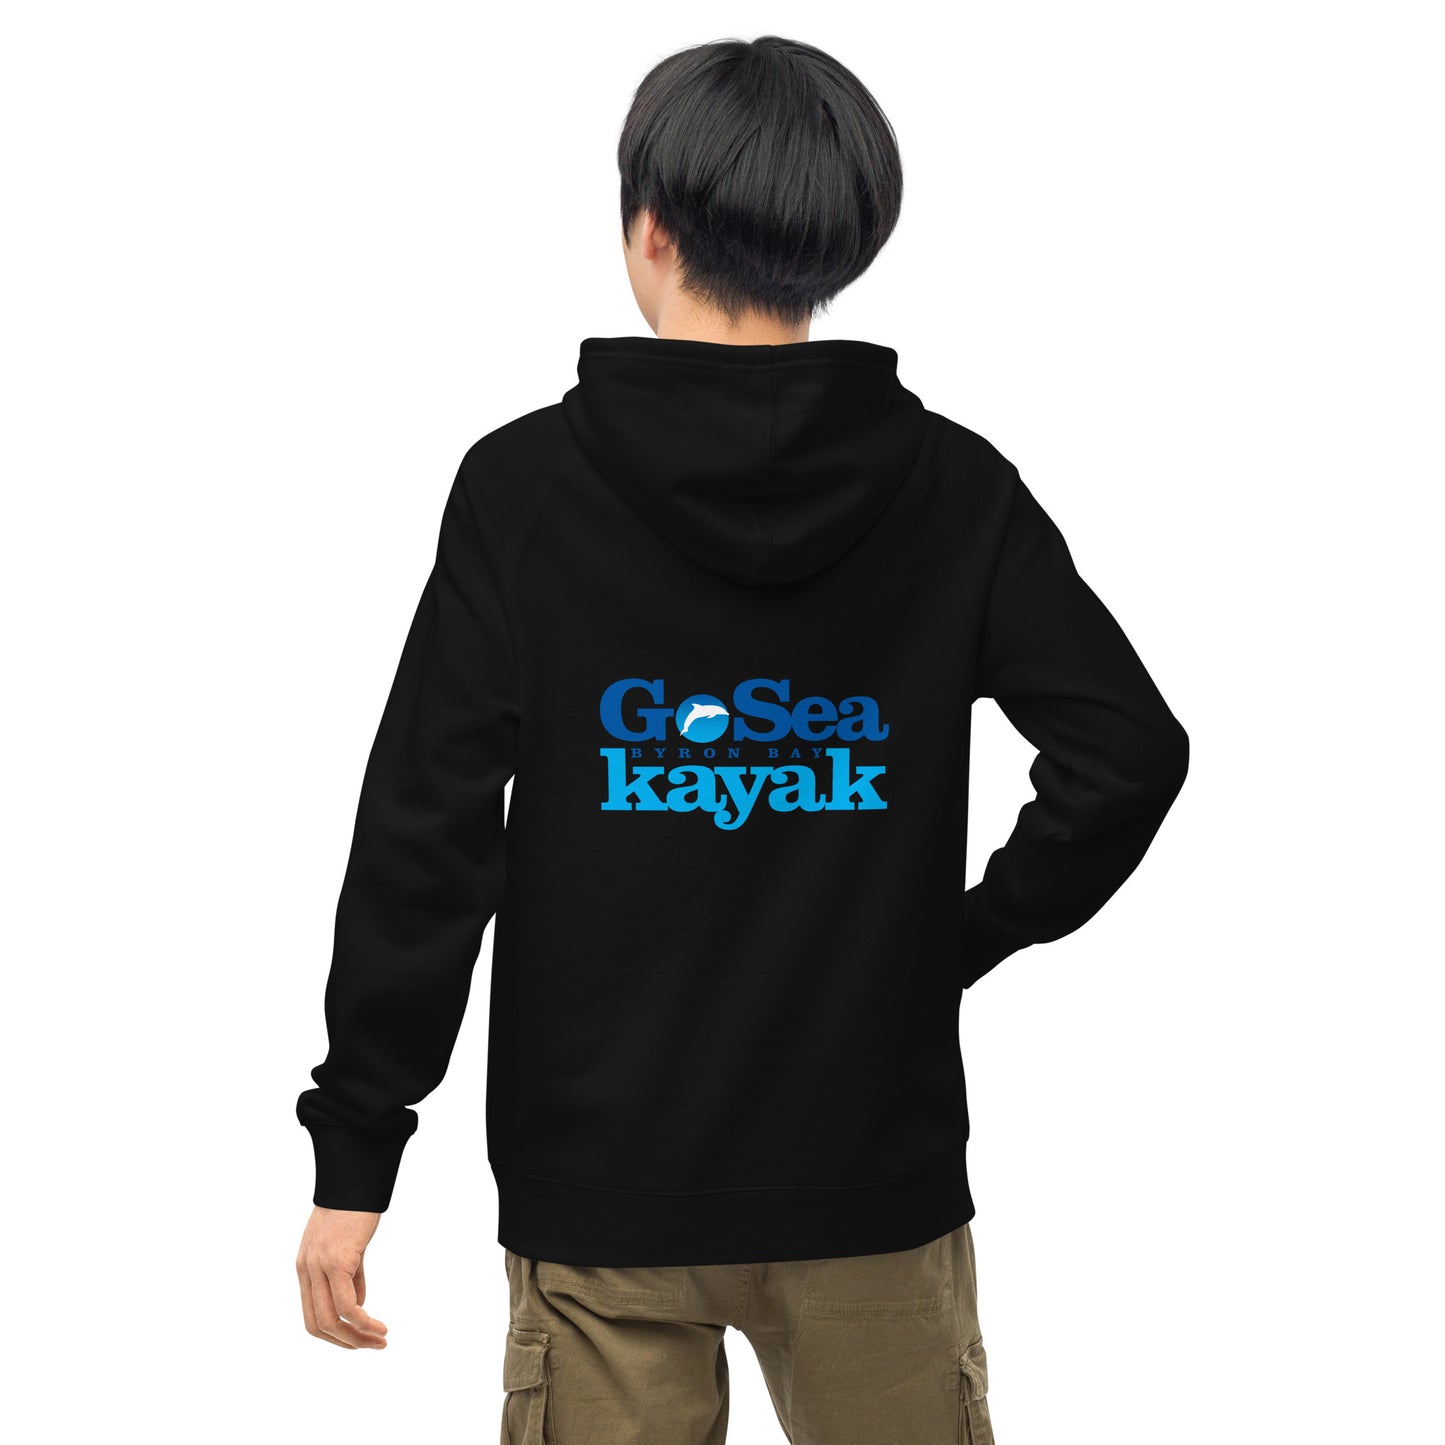  Unisex Hoodie - Black - Back view being warn by man with one arm by side and one hand in pocket - Go Sea Kayak Byron Bay logo on back and front, Kangaroo pocket on front - Genuine Byron Bay Merchandise | Produced by Go Sea Kayak Byron Bay 